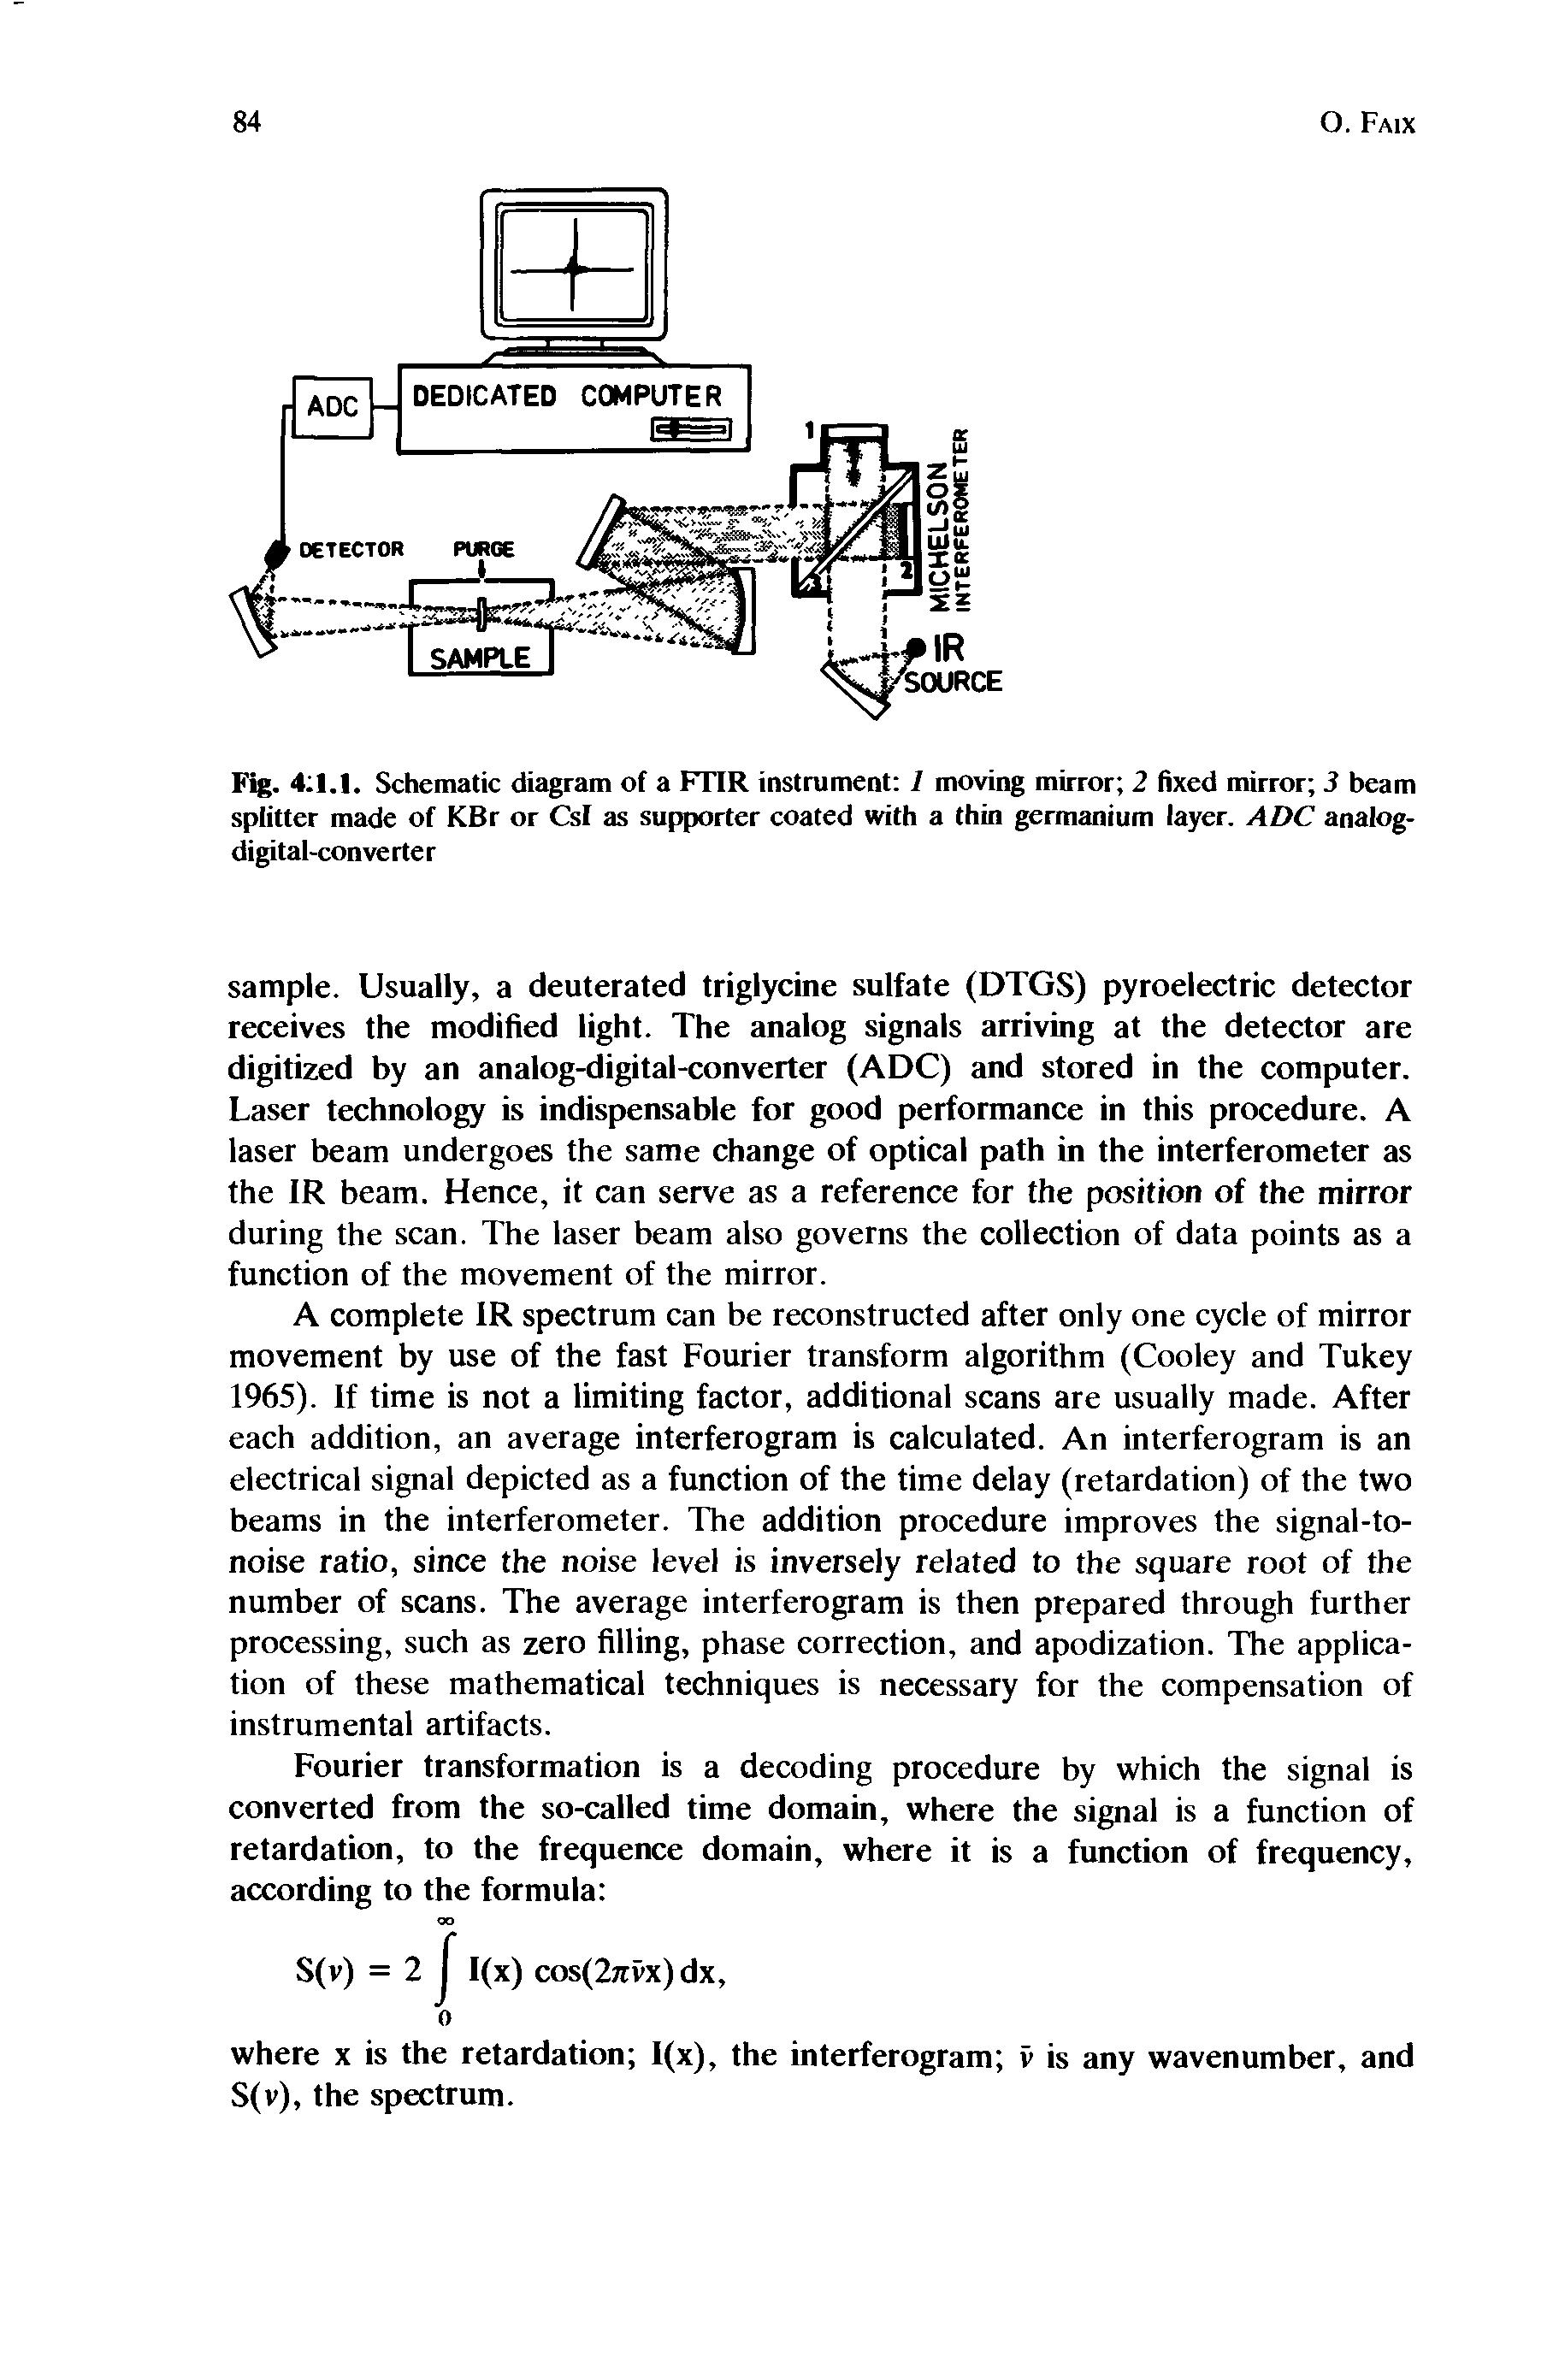 Fig. 4 1.1. Schematic diagram of a FTIR instrument 1 moving mirror 2 fixed mirror 3 beam splitter made of KBr or Csl as supporter coated with a thin germanium layer. ADC analog-digital-conve rte r...